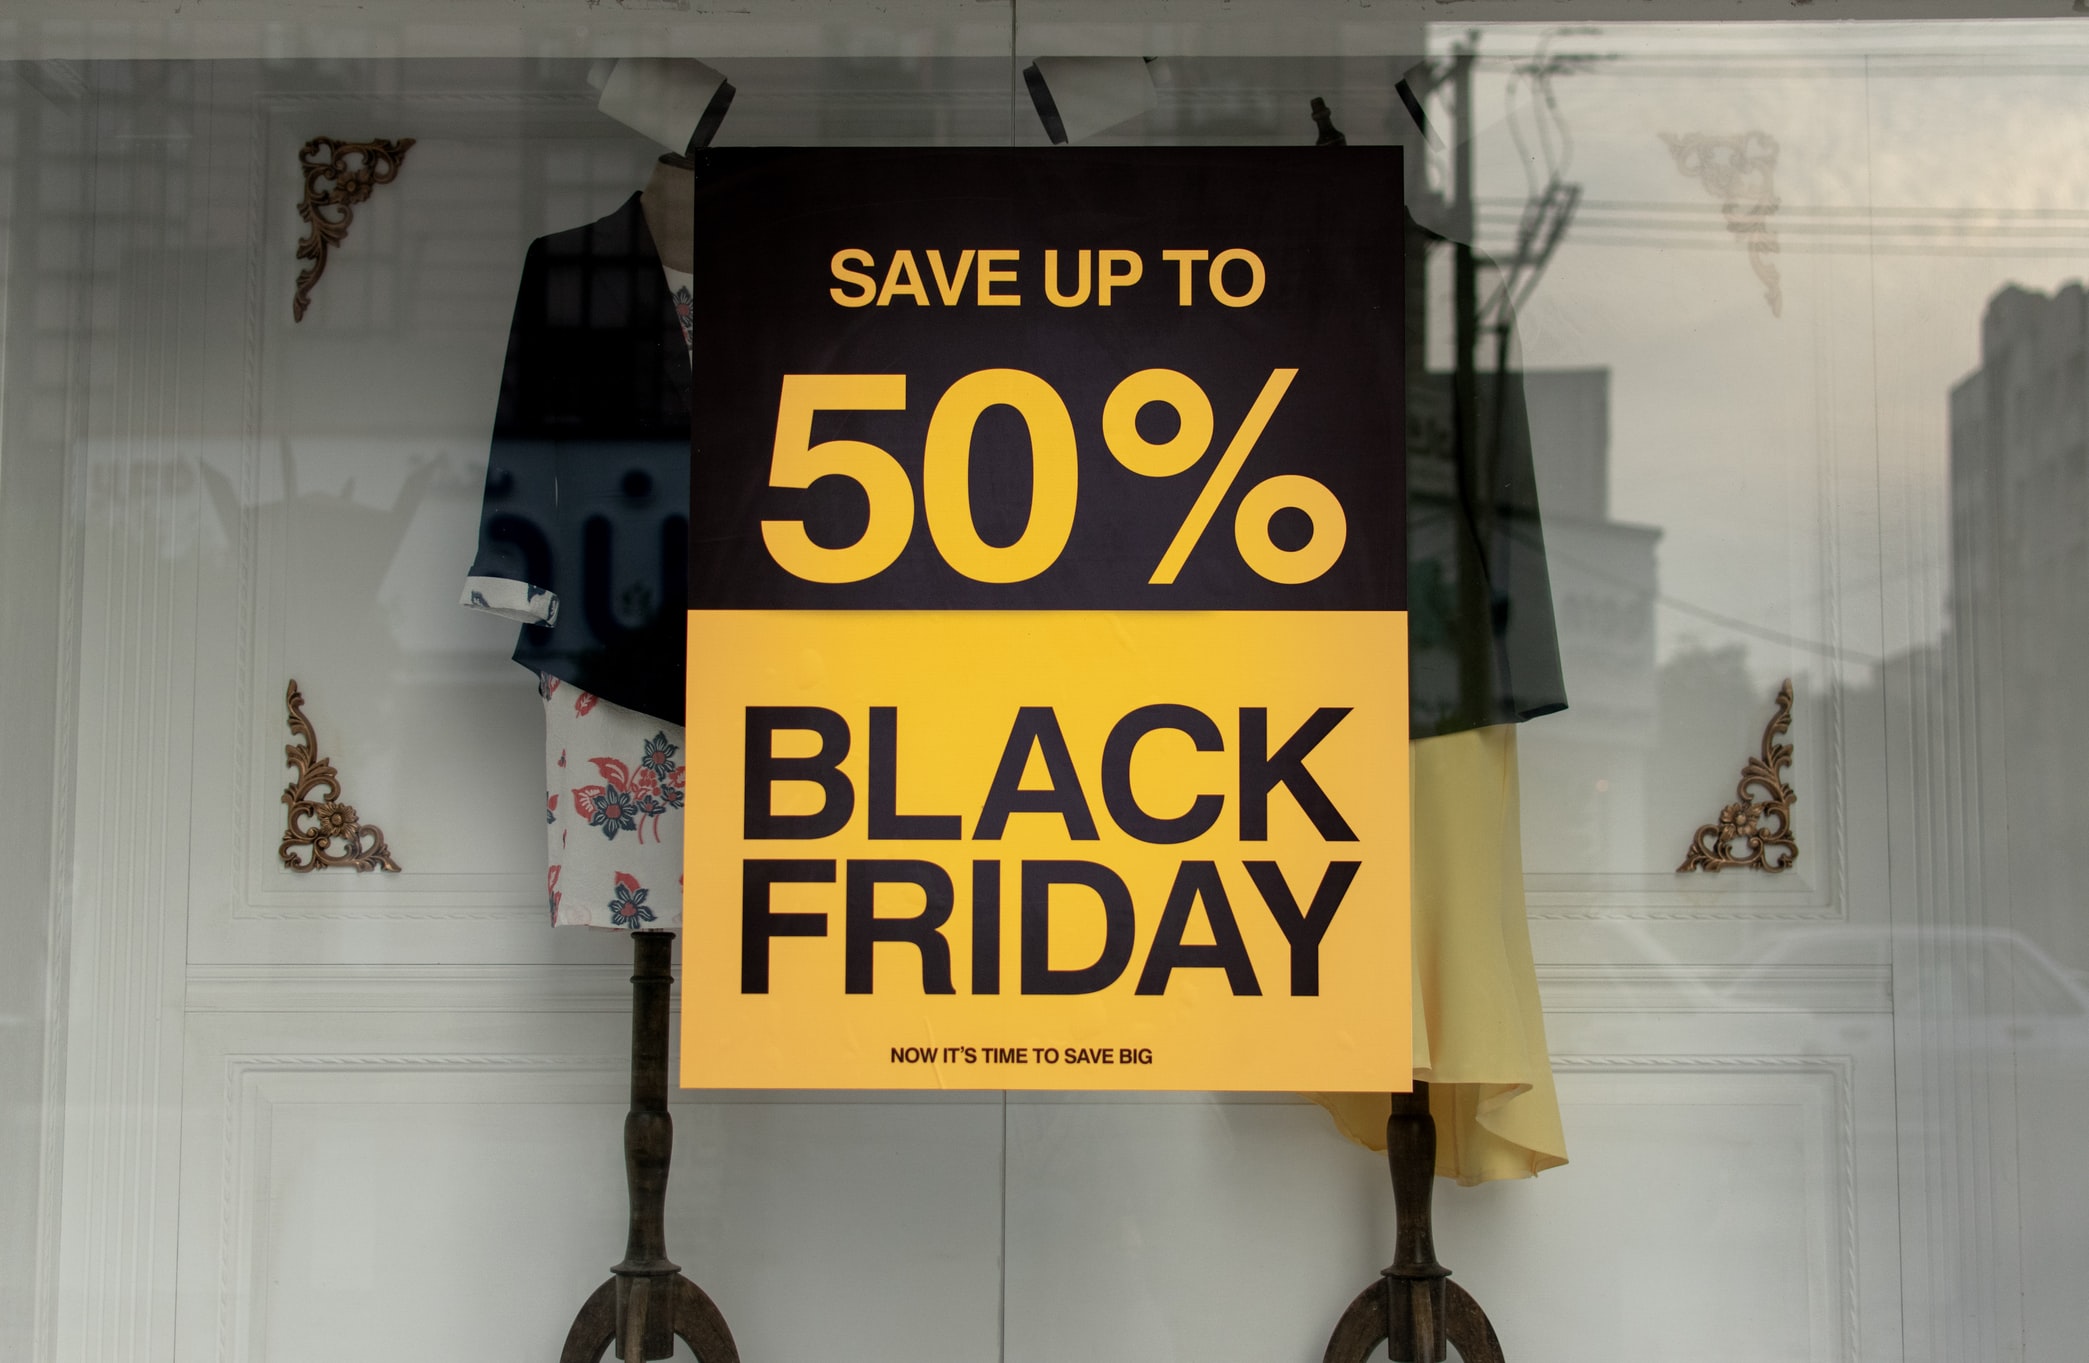 Sustainable brands on Black Friday: What do consumers perceive as authentic?